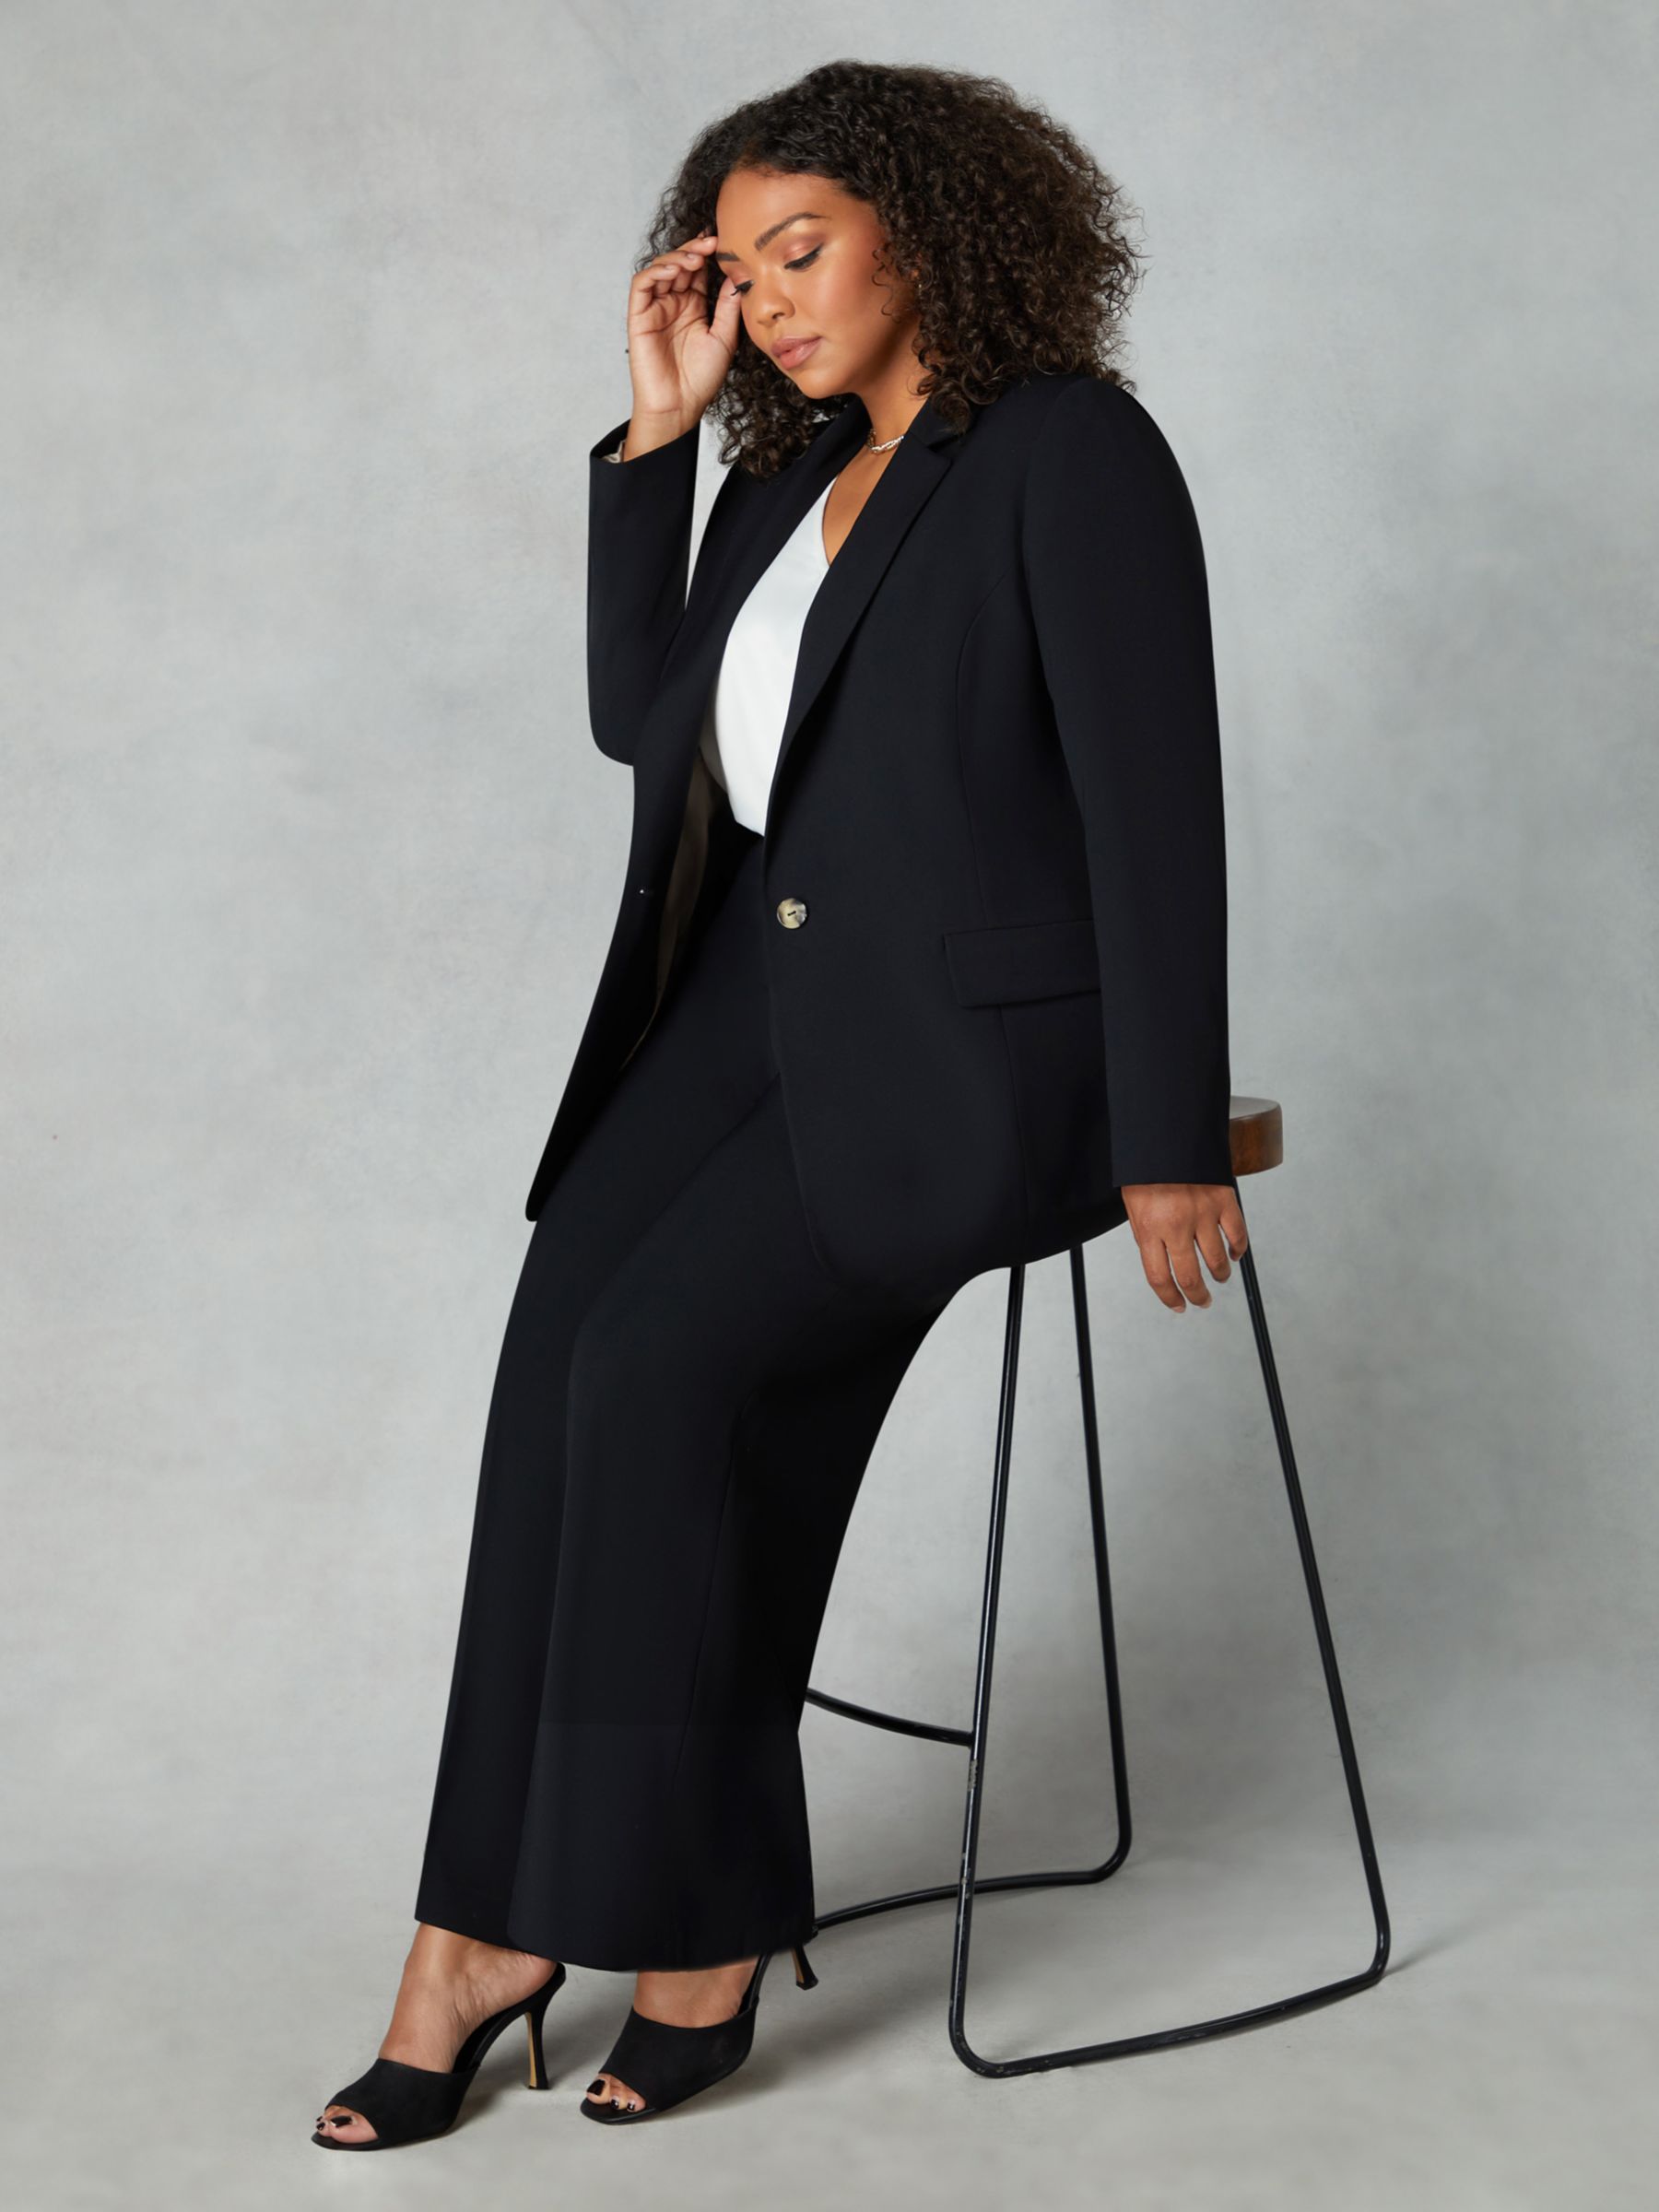 Live Unlimited Curve Jersey Bootleg Trousers, Black at John Lewis & Partners